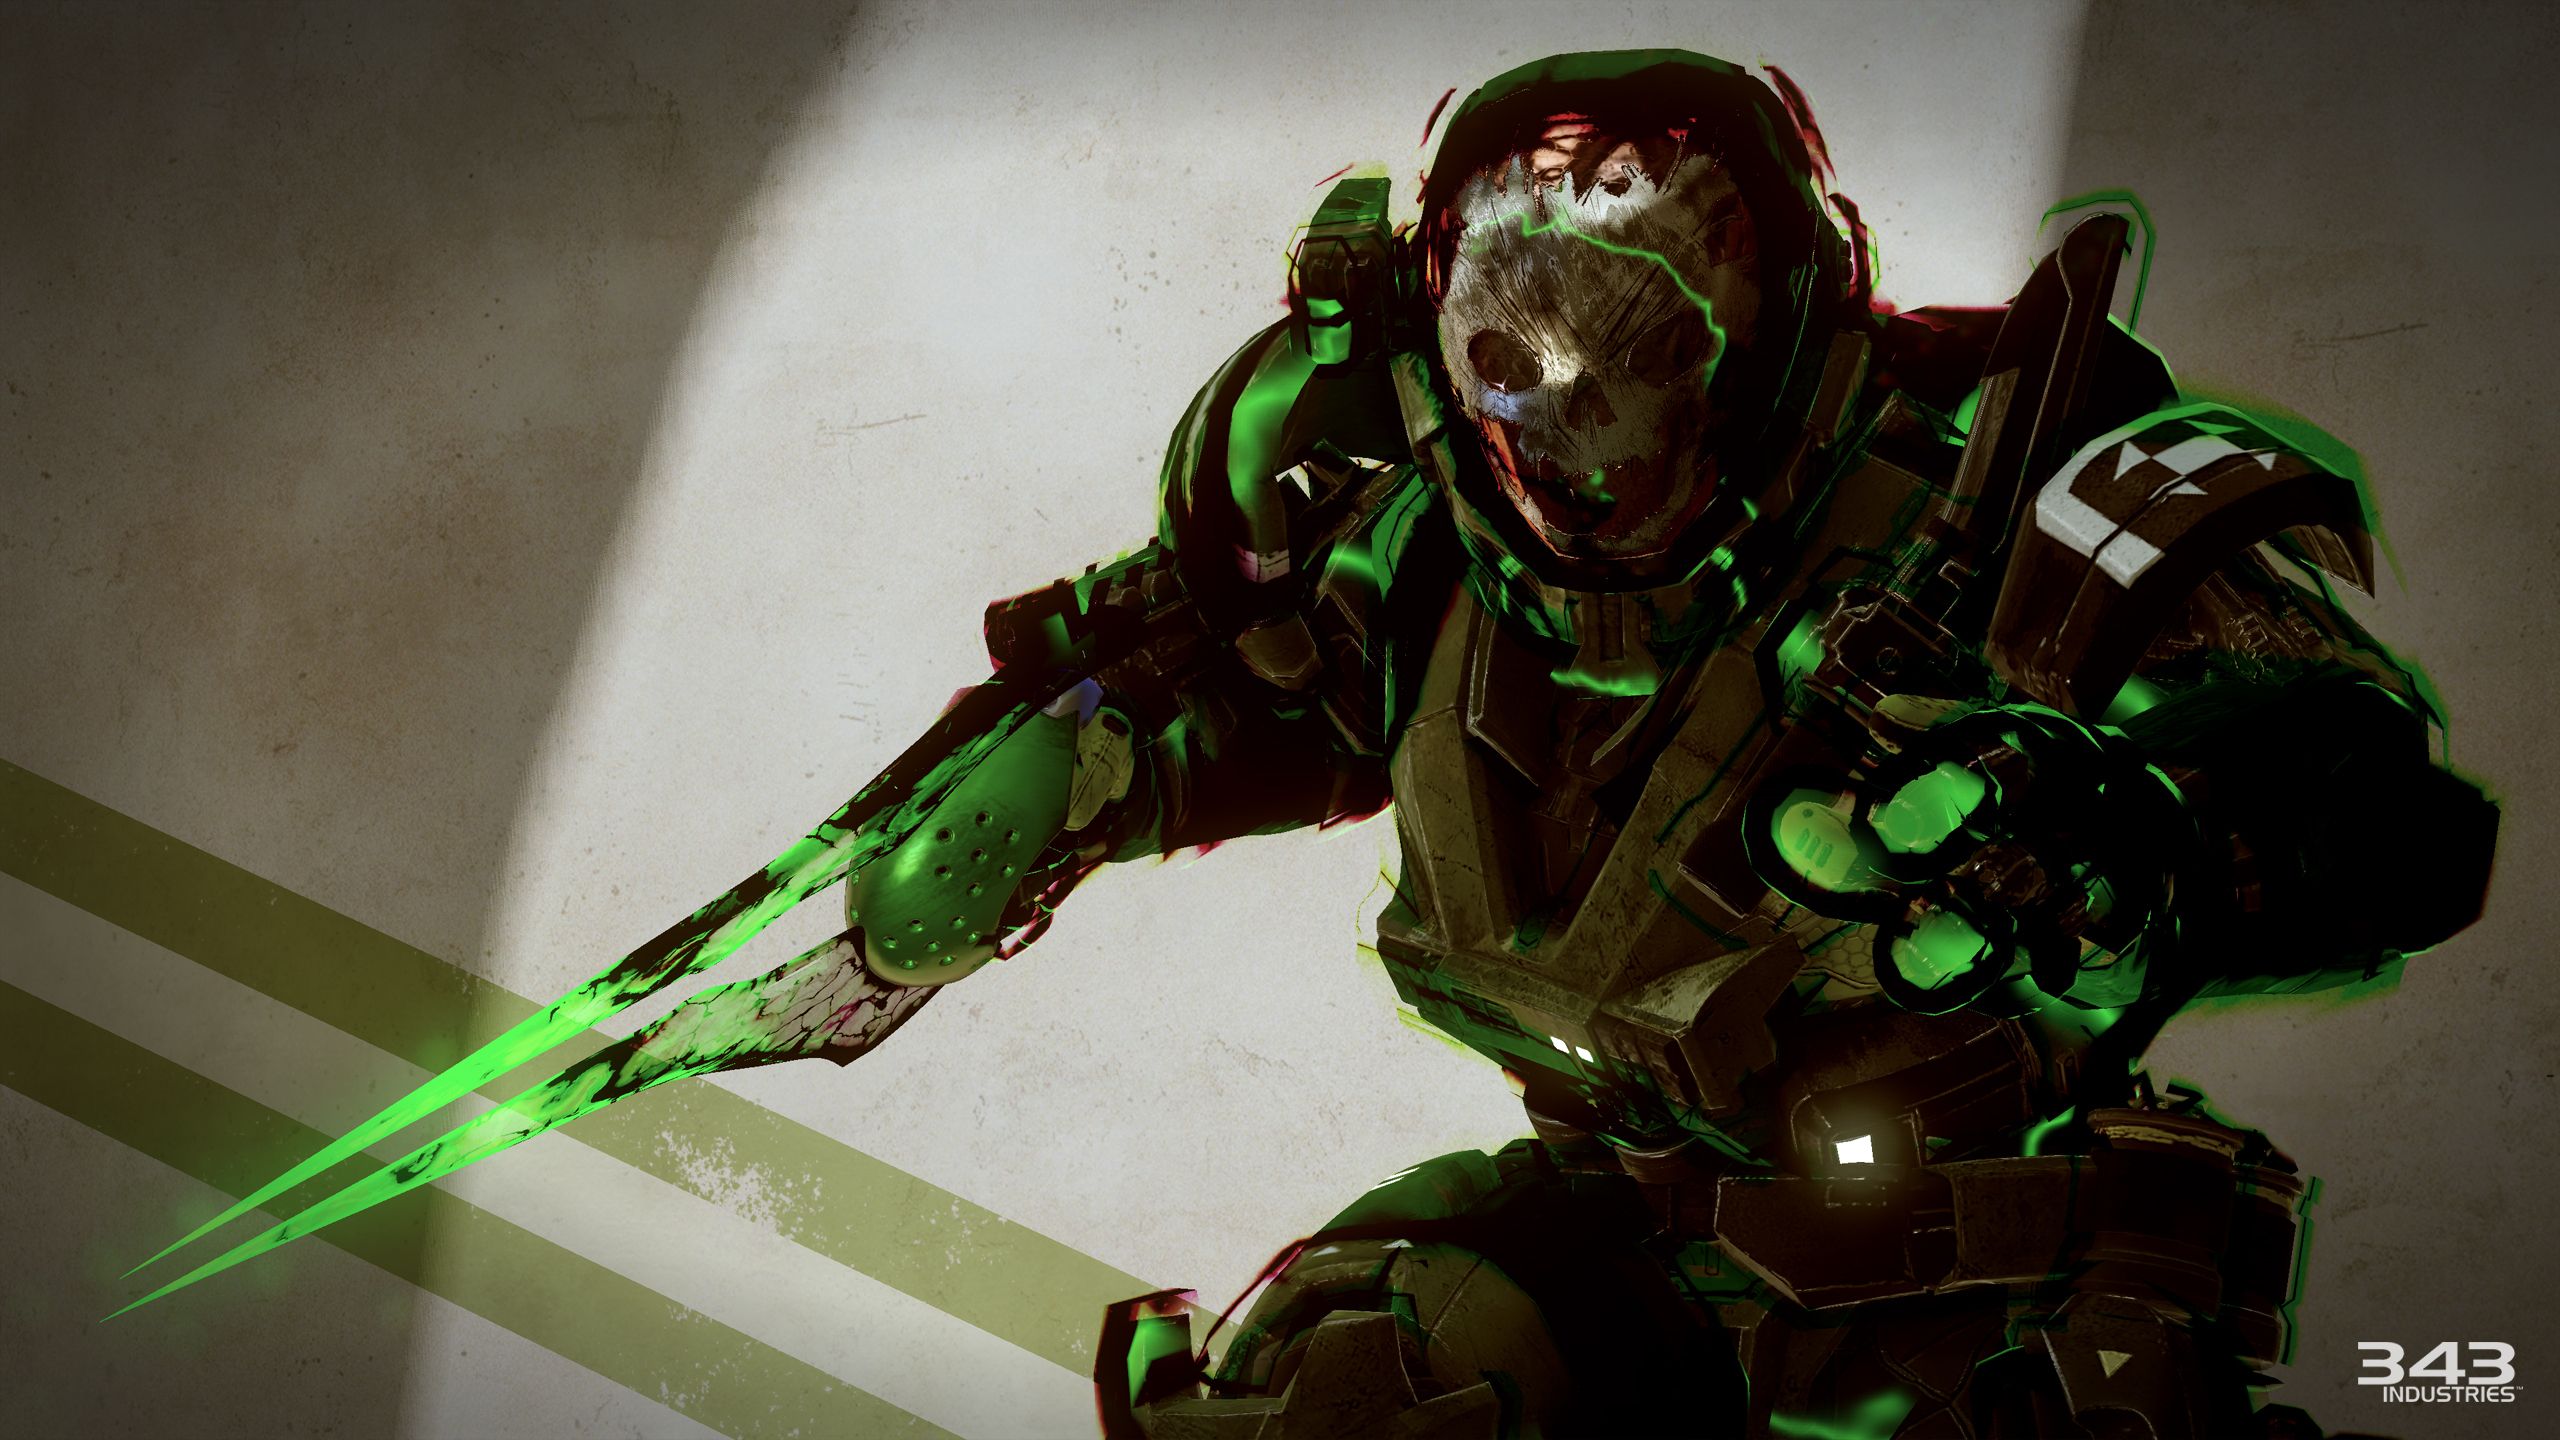 Memories of Reach Available Today in Halo 5: Guardians